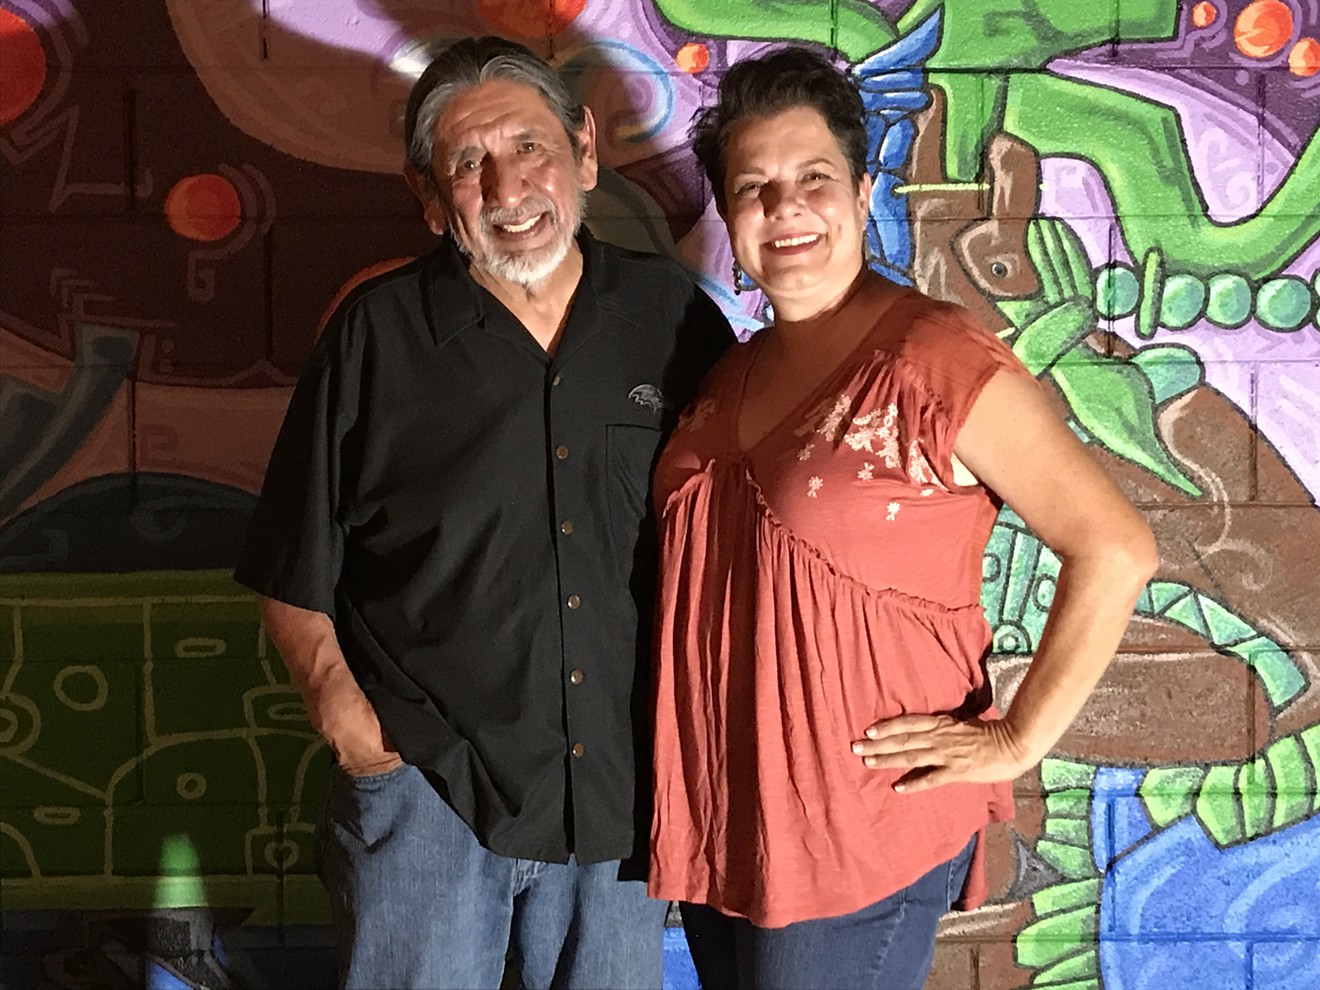 Martin Moreno and Emily Costello (pictured with a mural by Edgar Fernandez) will work together on creating light rail art.